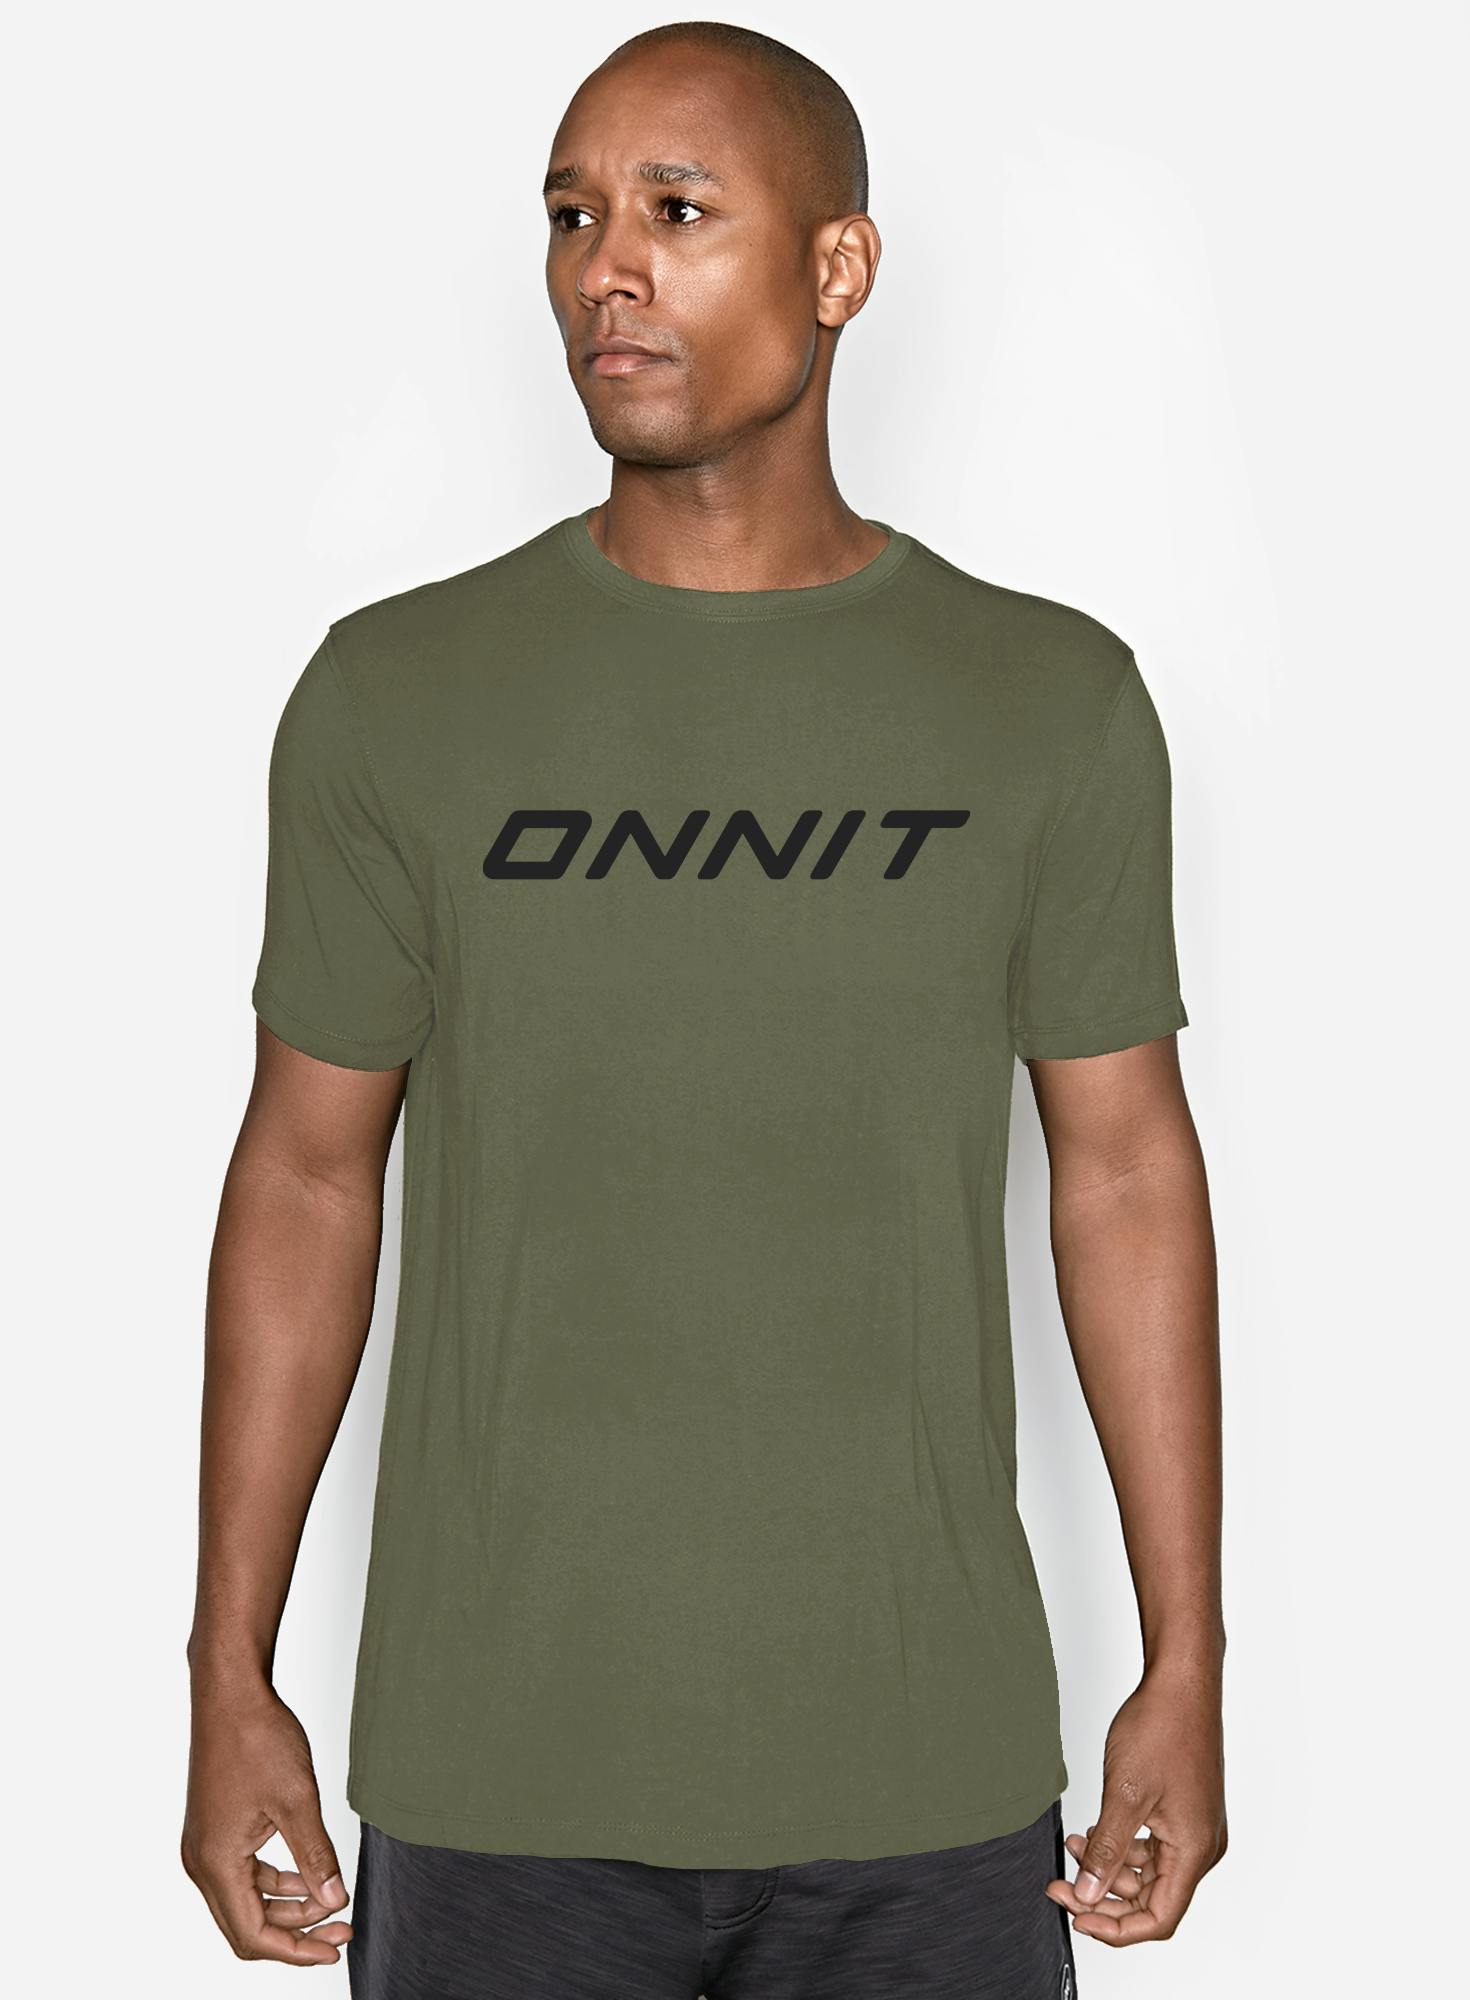 Onnit Type Bamboo T-Shirt